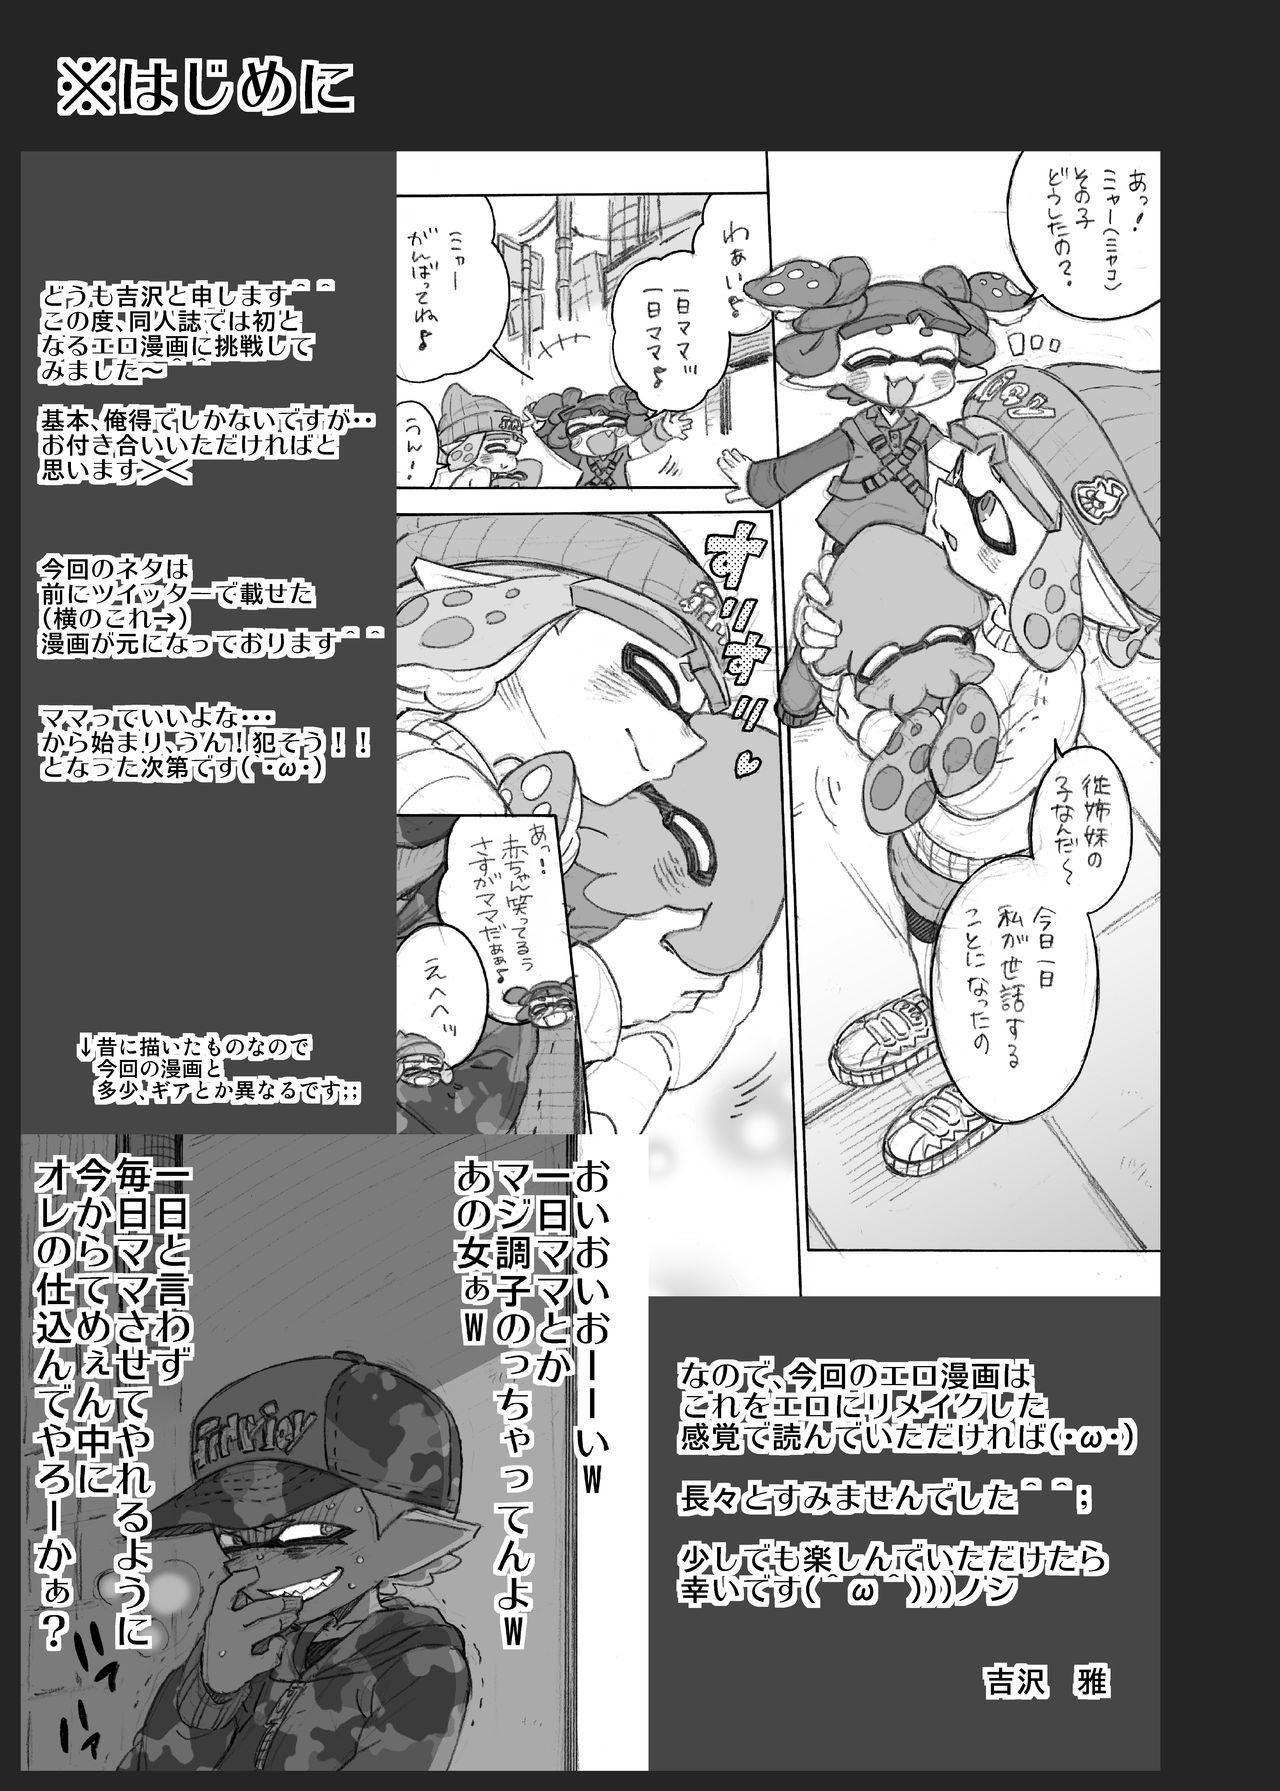 Spain Let's make that anxious daughter a mama - Splatoon Hard Core Free Porn - Page 2